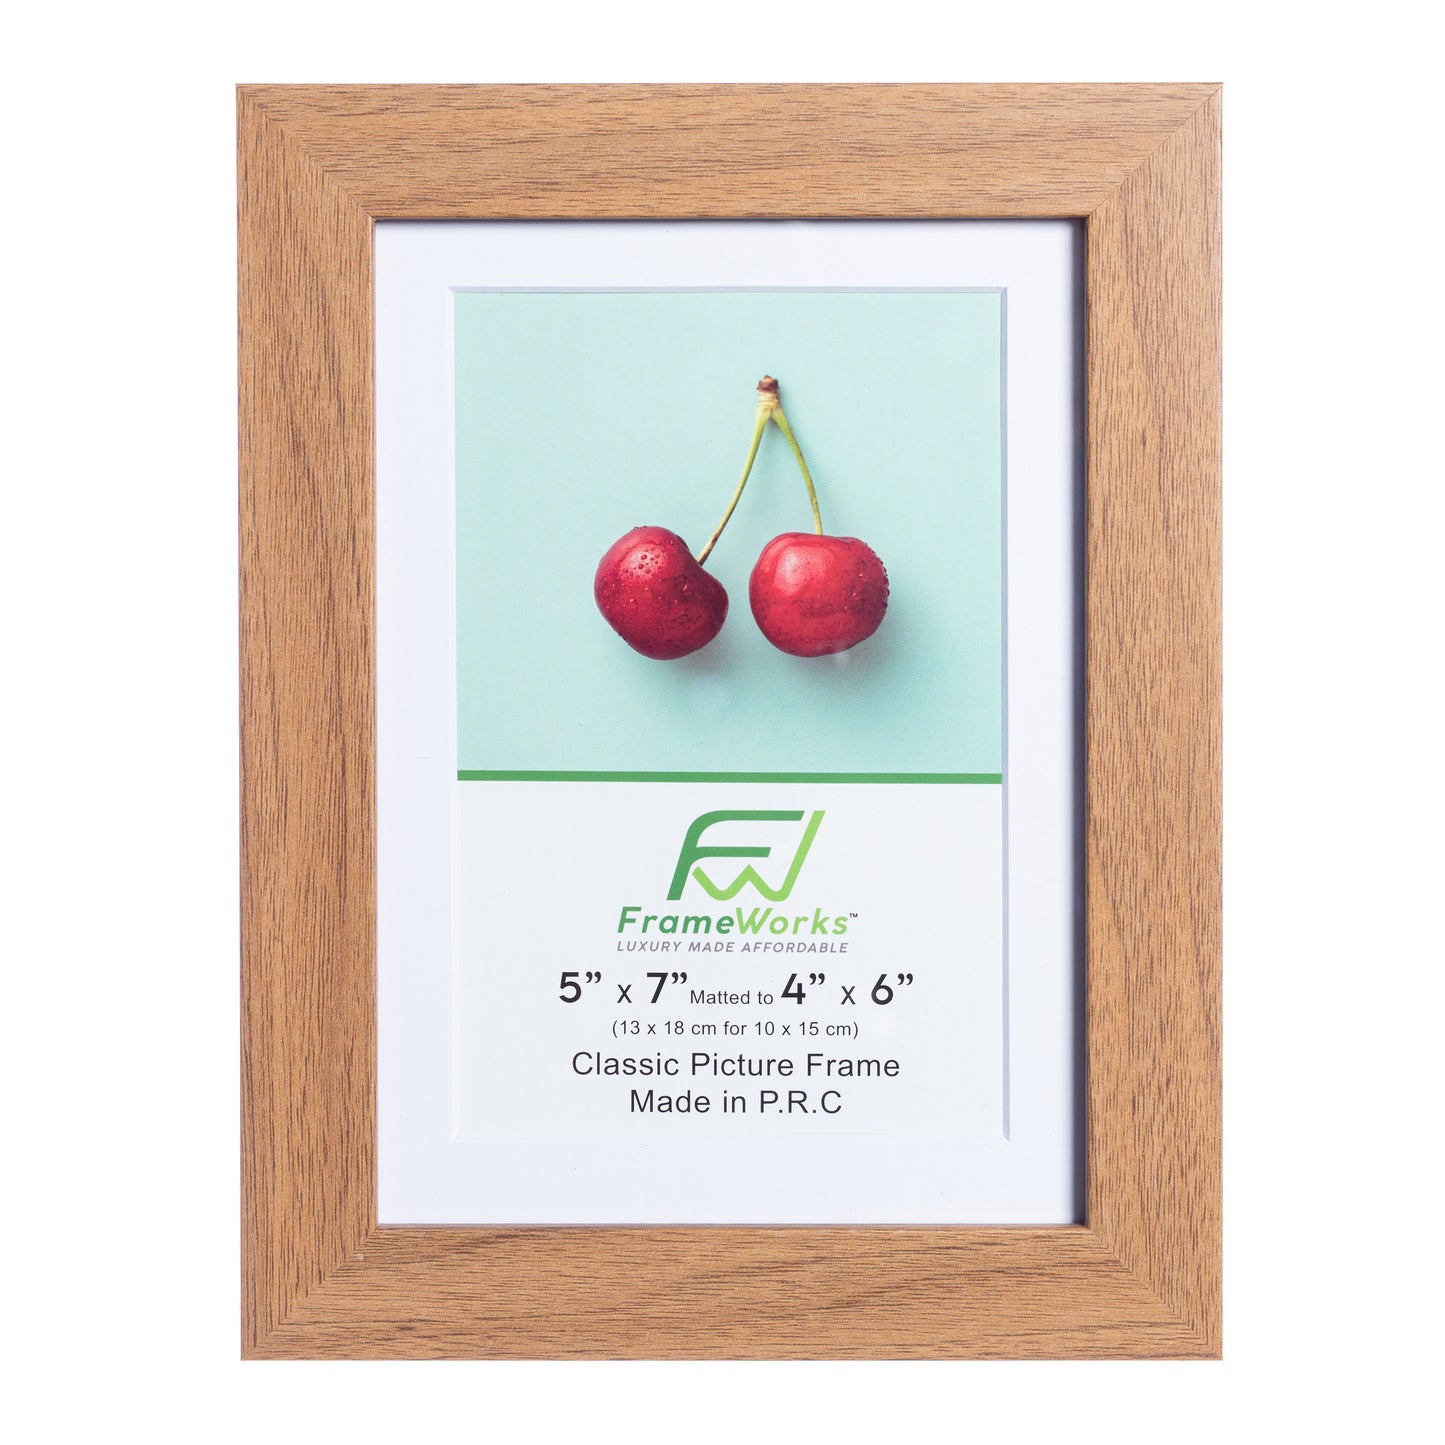 5" x 7" Classic Light Oak Wood Picture Frame with Tempered Glass, 4" x 6" Matted